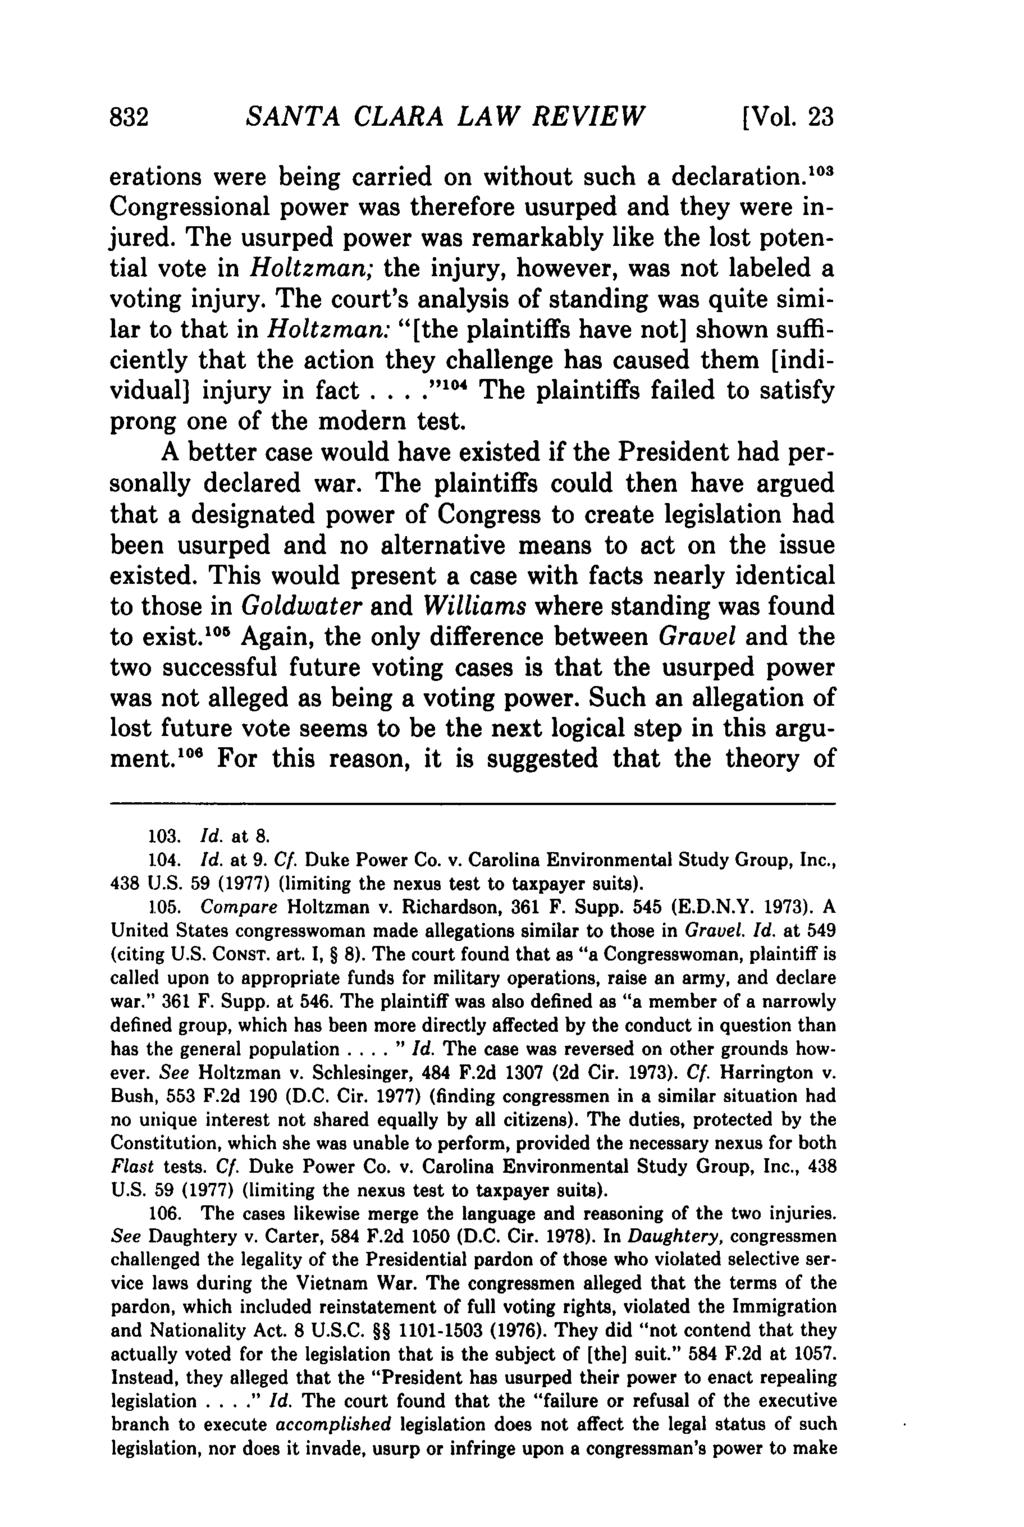 SANTA CLARA LAW REVIEW [Vol. 23 erations were being carried on without such a declaration. 0 3 Congressional power was therefore usurped and they were injured.